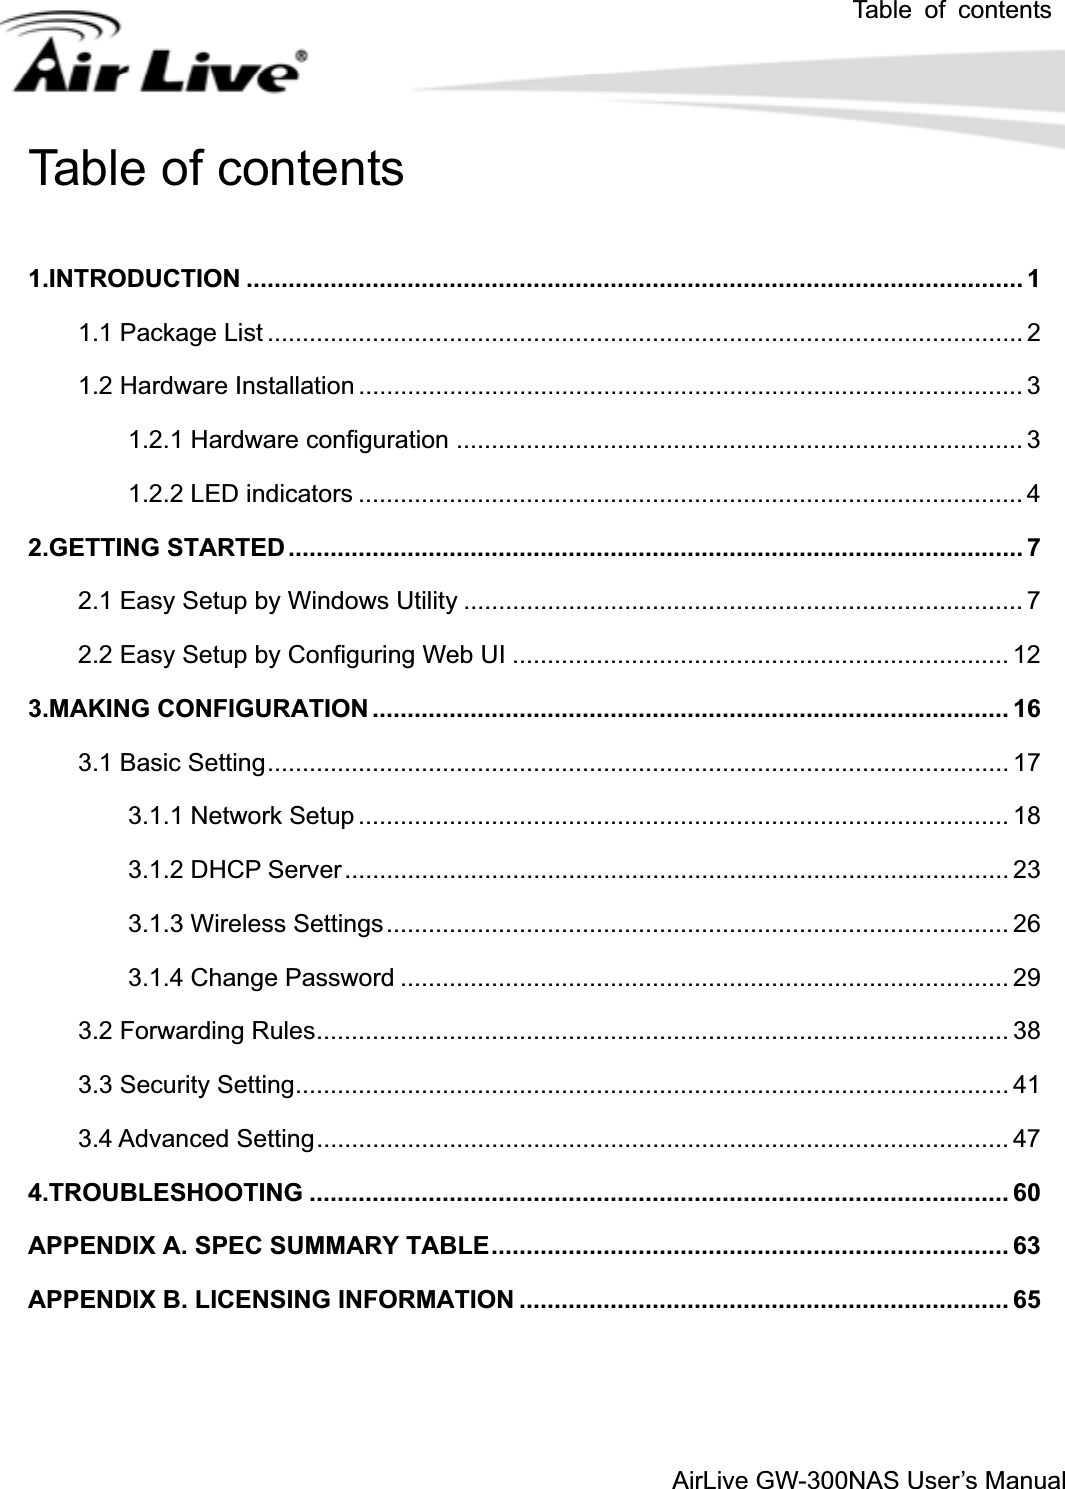 Table of contents AirLive GW-300NAS User’s ManualTable of contents 1.INTRODUCTION ............................................................................................................... 1 1.1 Package List ............................................................................................................ 2 1.2 Hardware Installation ............................................................................................... 3 1.2.1 Hardware configuration ................................................................................. 3 1.2.2 LED indicators ............................................................................................... 4 2.GETTING STARTED......................................................................................................... 7 2.1 Easy Setup by Windows Utility ................................................................................ 7 2.2 Easy Setup by Configuring Web UI ....................................................................... 12 3.MAKING CONFIGURATION ........................................................................................... 16 3.1 Basic Setting.......................................................................................................... 17 3.1.1 Network Setup ............................................................................................. 18 3.1.2 DHCP Server............................................................................................... 23 3.1.3 Wireless Settings......................................................................................... 26 3.1.4 Change Password ....................................................................................... 29 3.2 Forwarding Rules................................................................................................... 38 3.3 Security Setting...................................................................................................... 41 3.4 Advanced Setting................................................................................................... 47 4.TROUBLESHOOTING .................................................................................................... 60 APPENDIX A. SPEC SUMMARY TABLE.......................................................................... 63 APPENDIX B. LICENSING INFORMATION ...................................................................... 65 